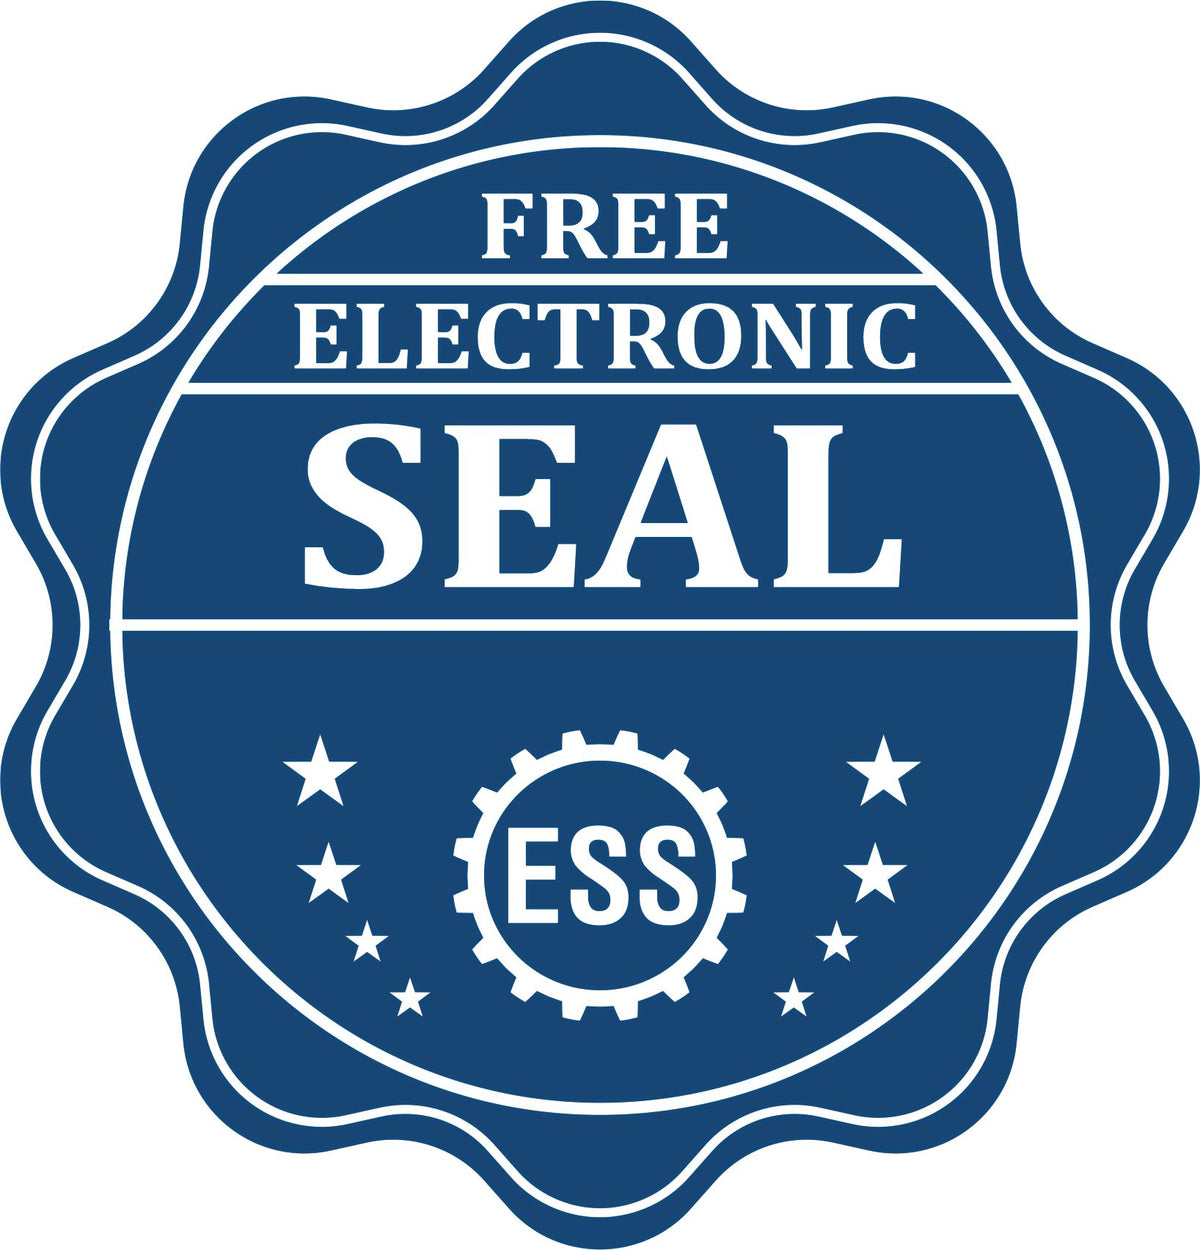 A badge showing a free electronic seal for the State of Pennsylvania Soft Land Surveyor Embossing Seal with stars and the ESS gear on the emblem.